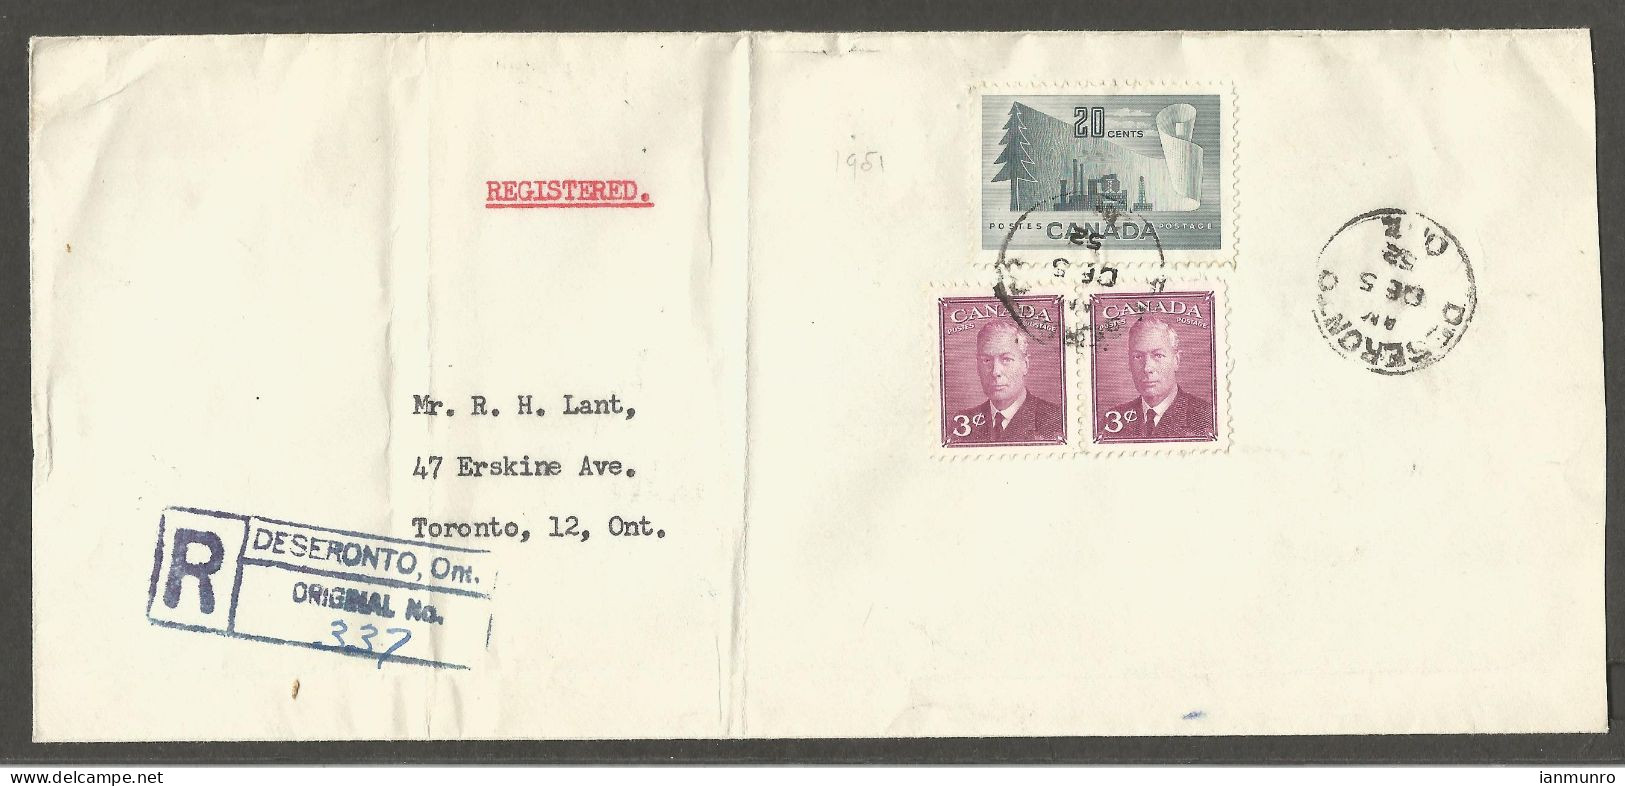 1952 Registered Cover 26c Forestry/Postes RPO CDS Deseronto Ont To Toronto Ontario - Postal History